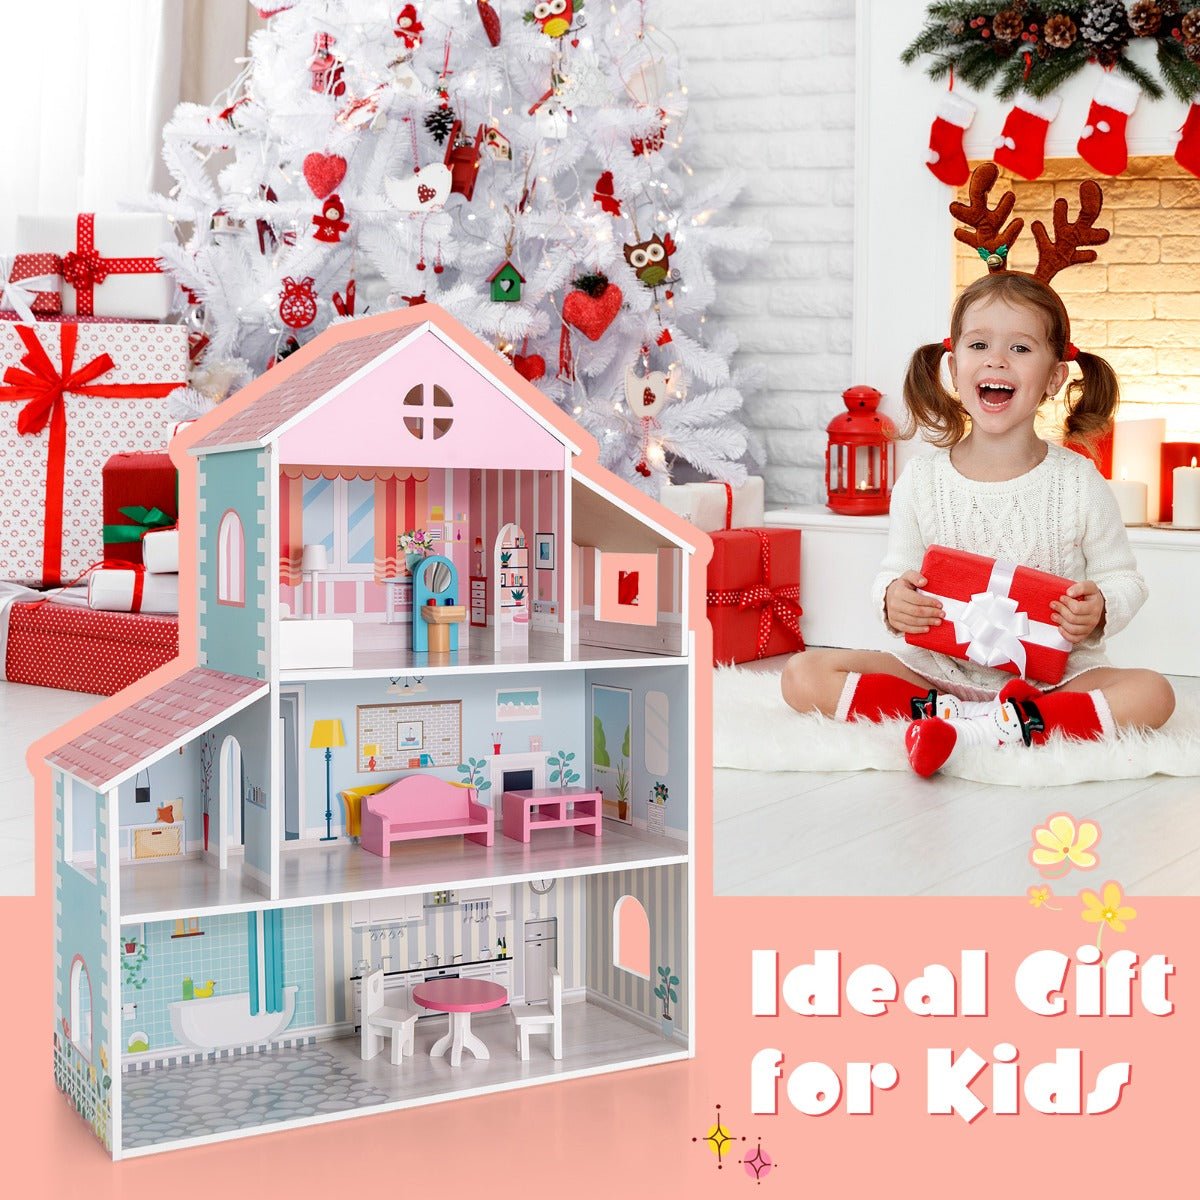 Create Memories with a Furnished Wooden Pretend Play Doll House